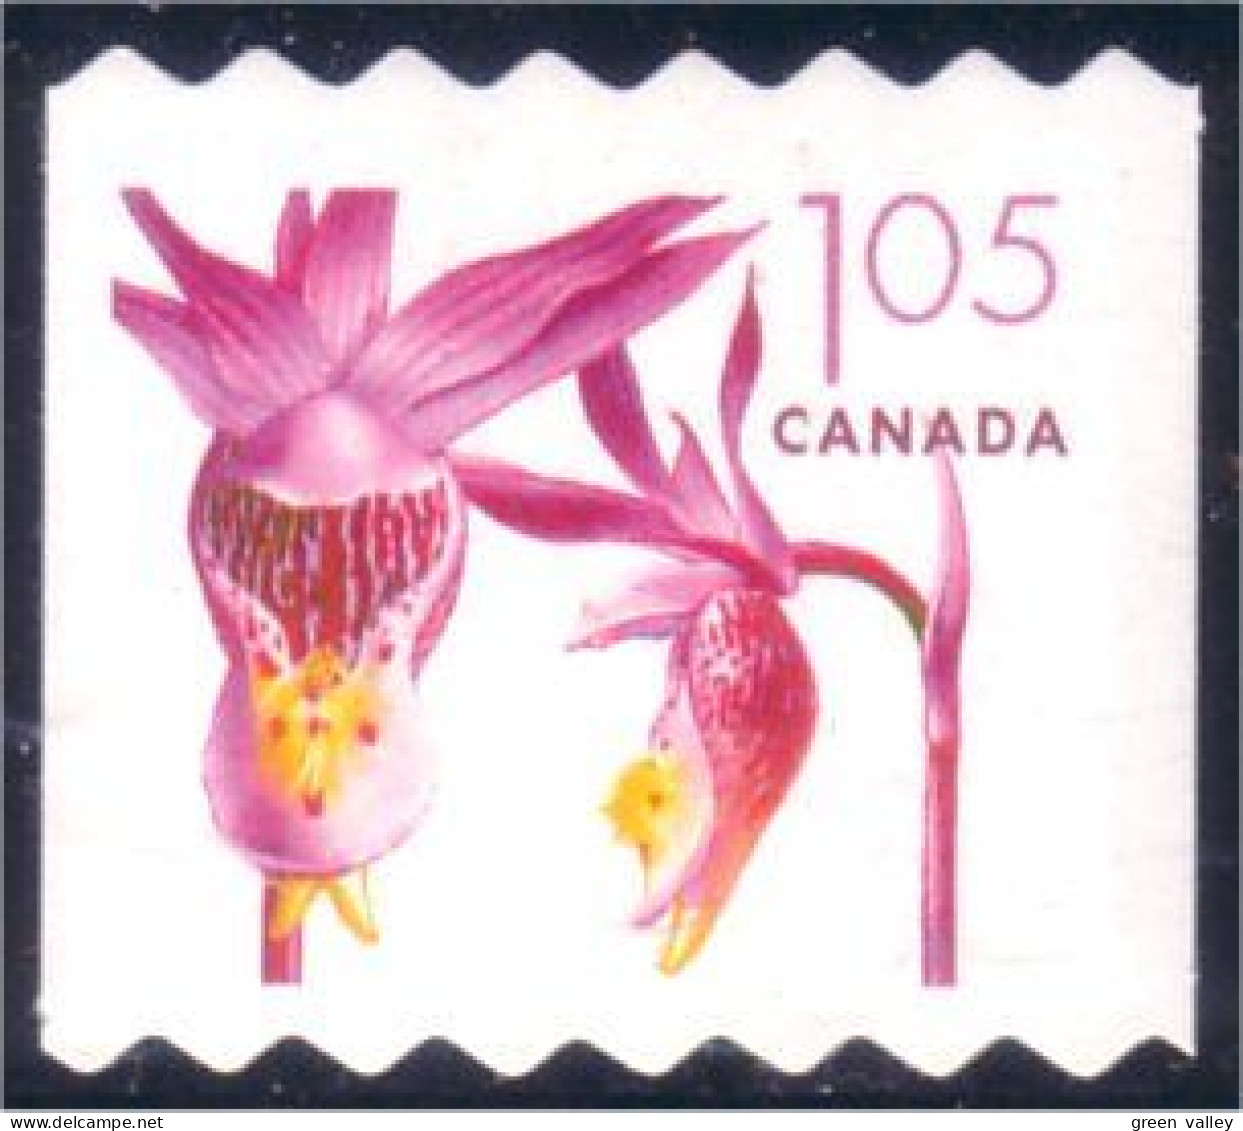 Canada Orchid Orchidee Collection Annual Pack MNH ** Neuf SC (C21-30iiia) - Unused Stamps